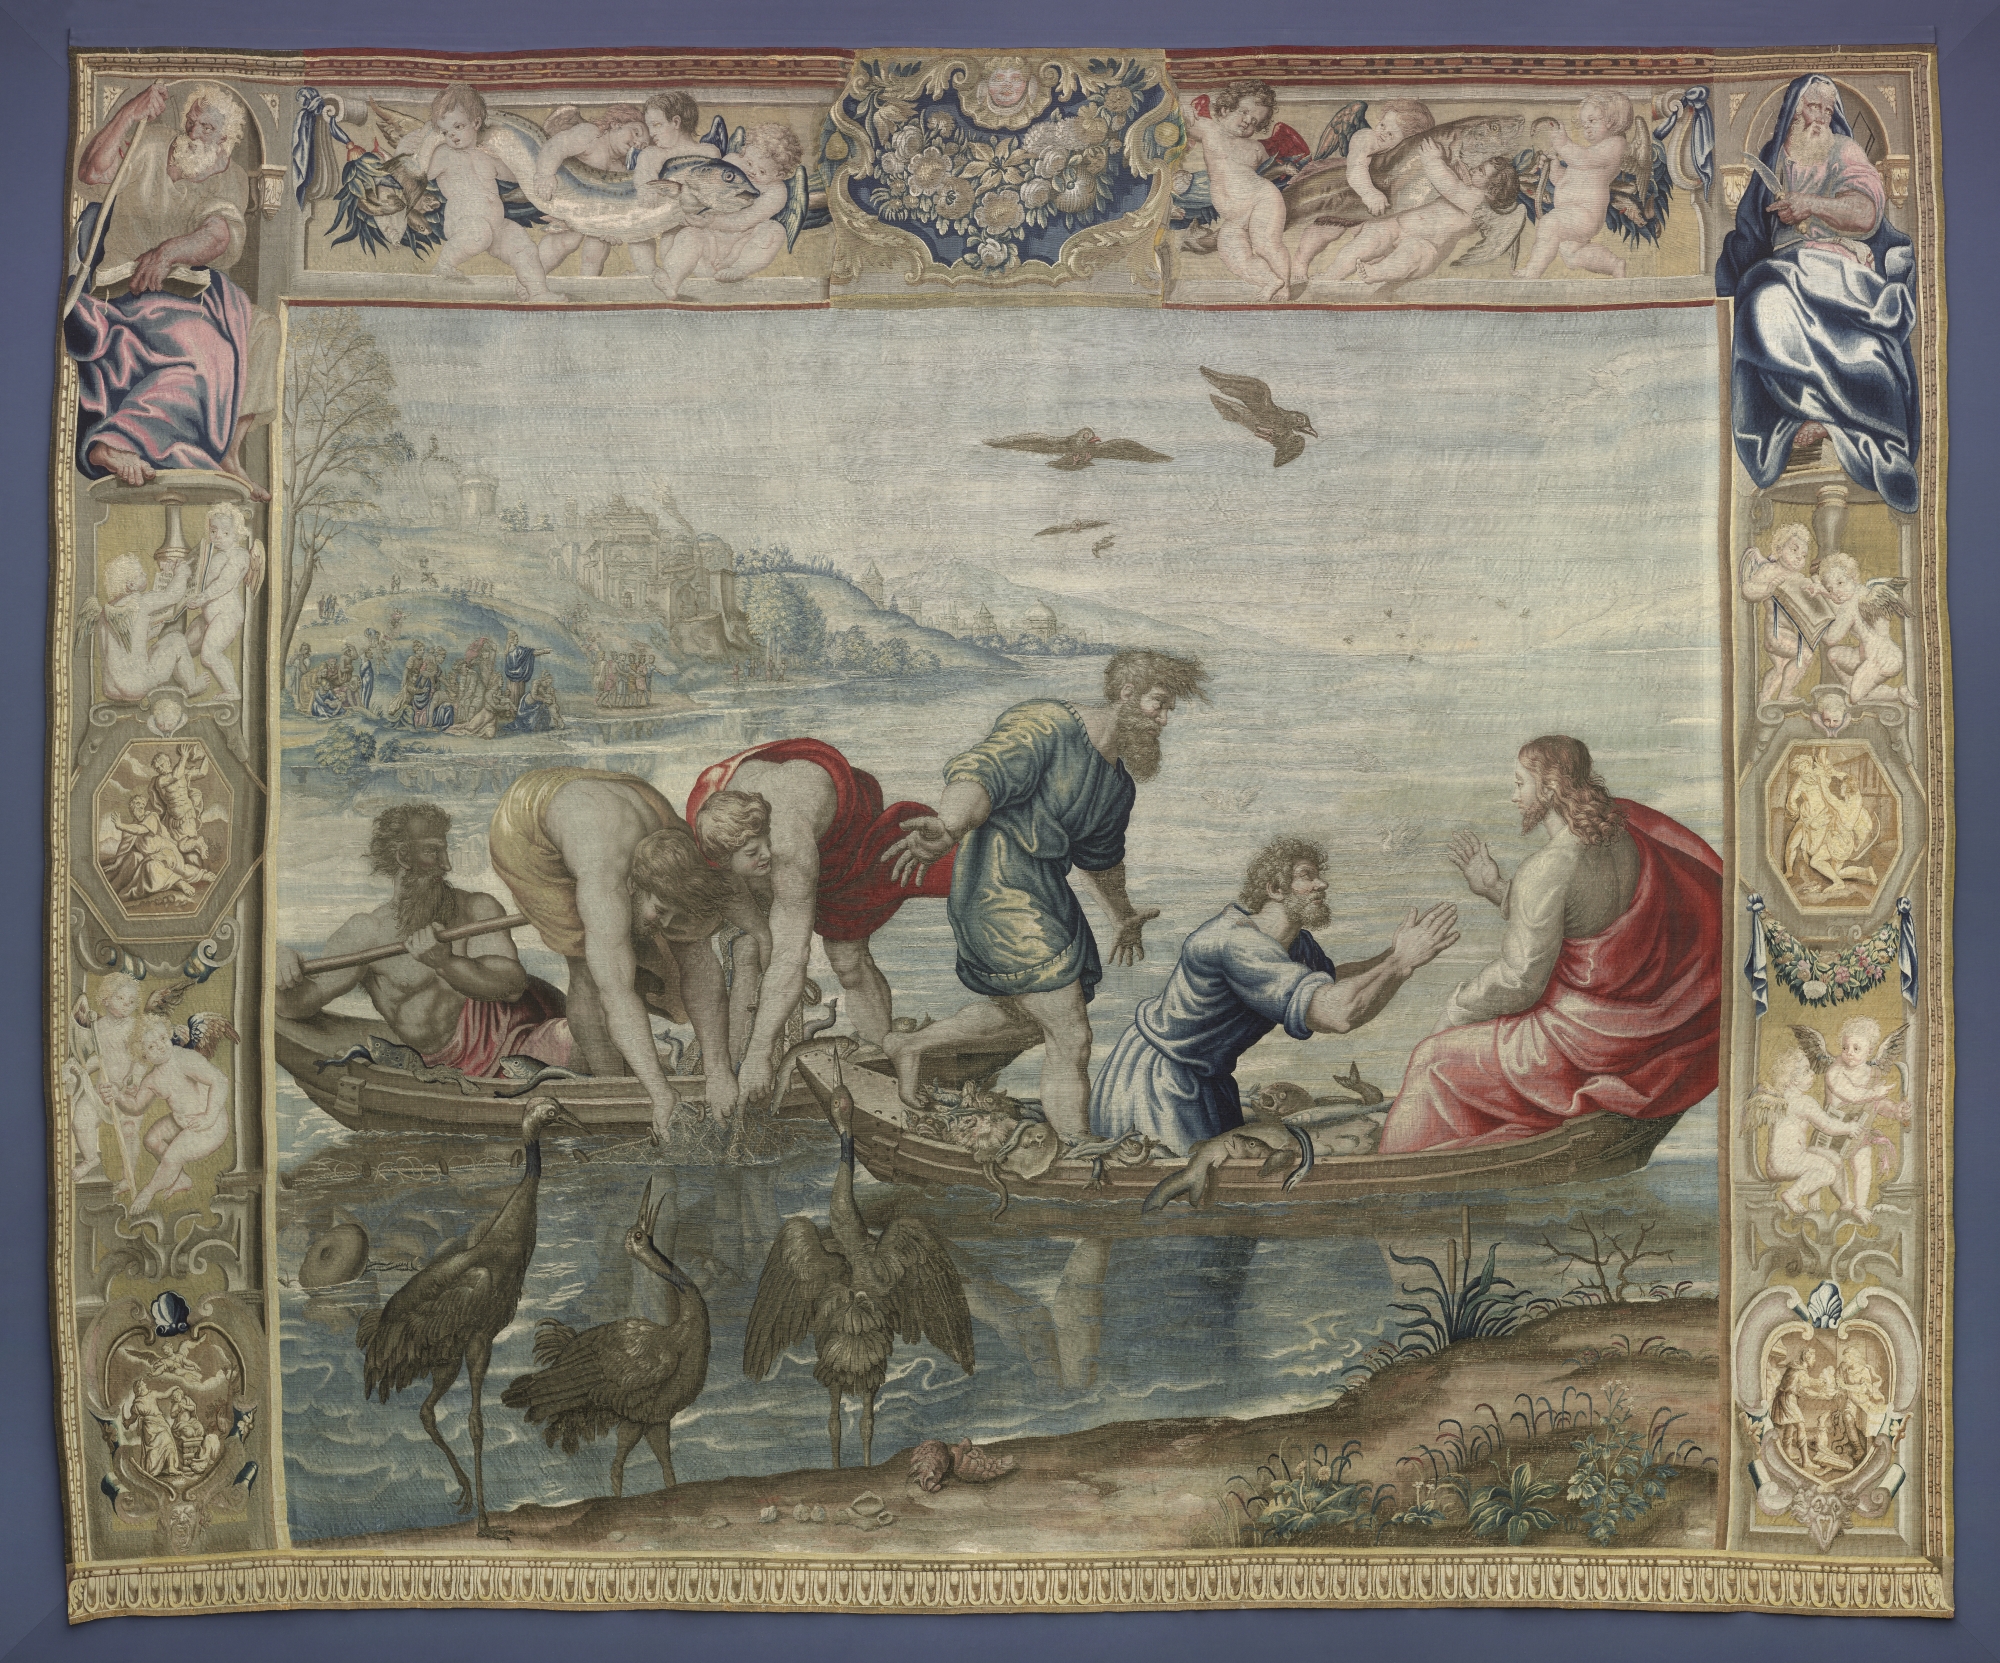 Mortlake Tapestry Manufactory (after designs by Raphael), The Miraculous Draft of Fishes, After 1625.Tapestry, Staatliche Kunstsammlungen Dresden, Gemäldegalerie Alte Meister